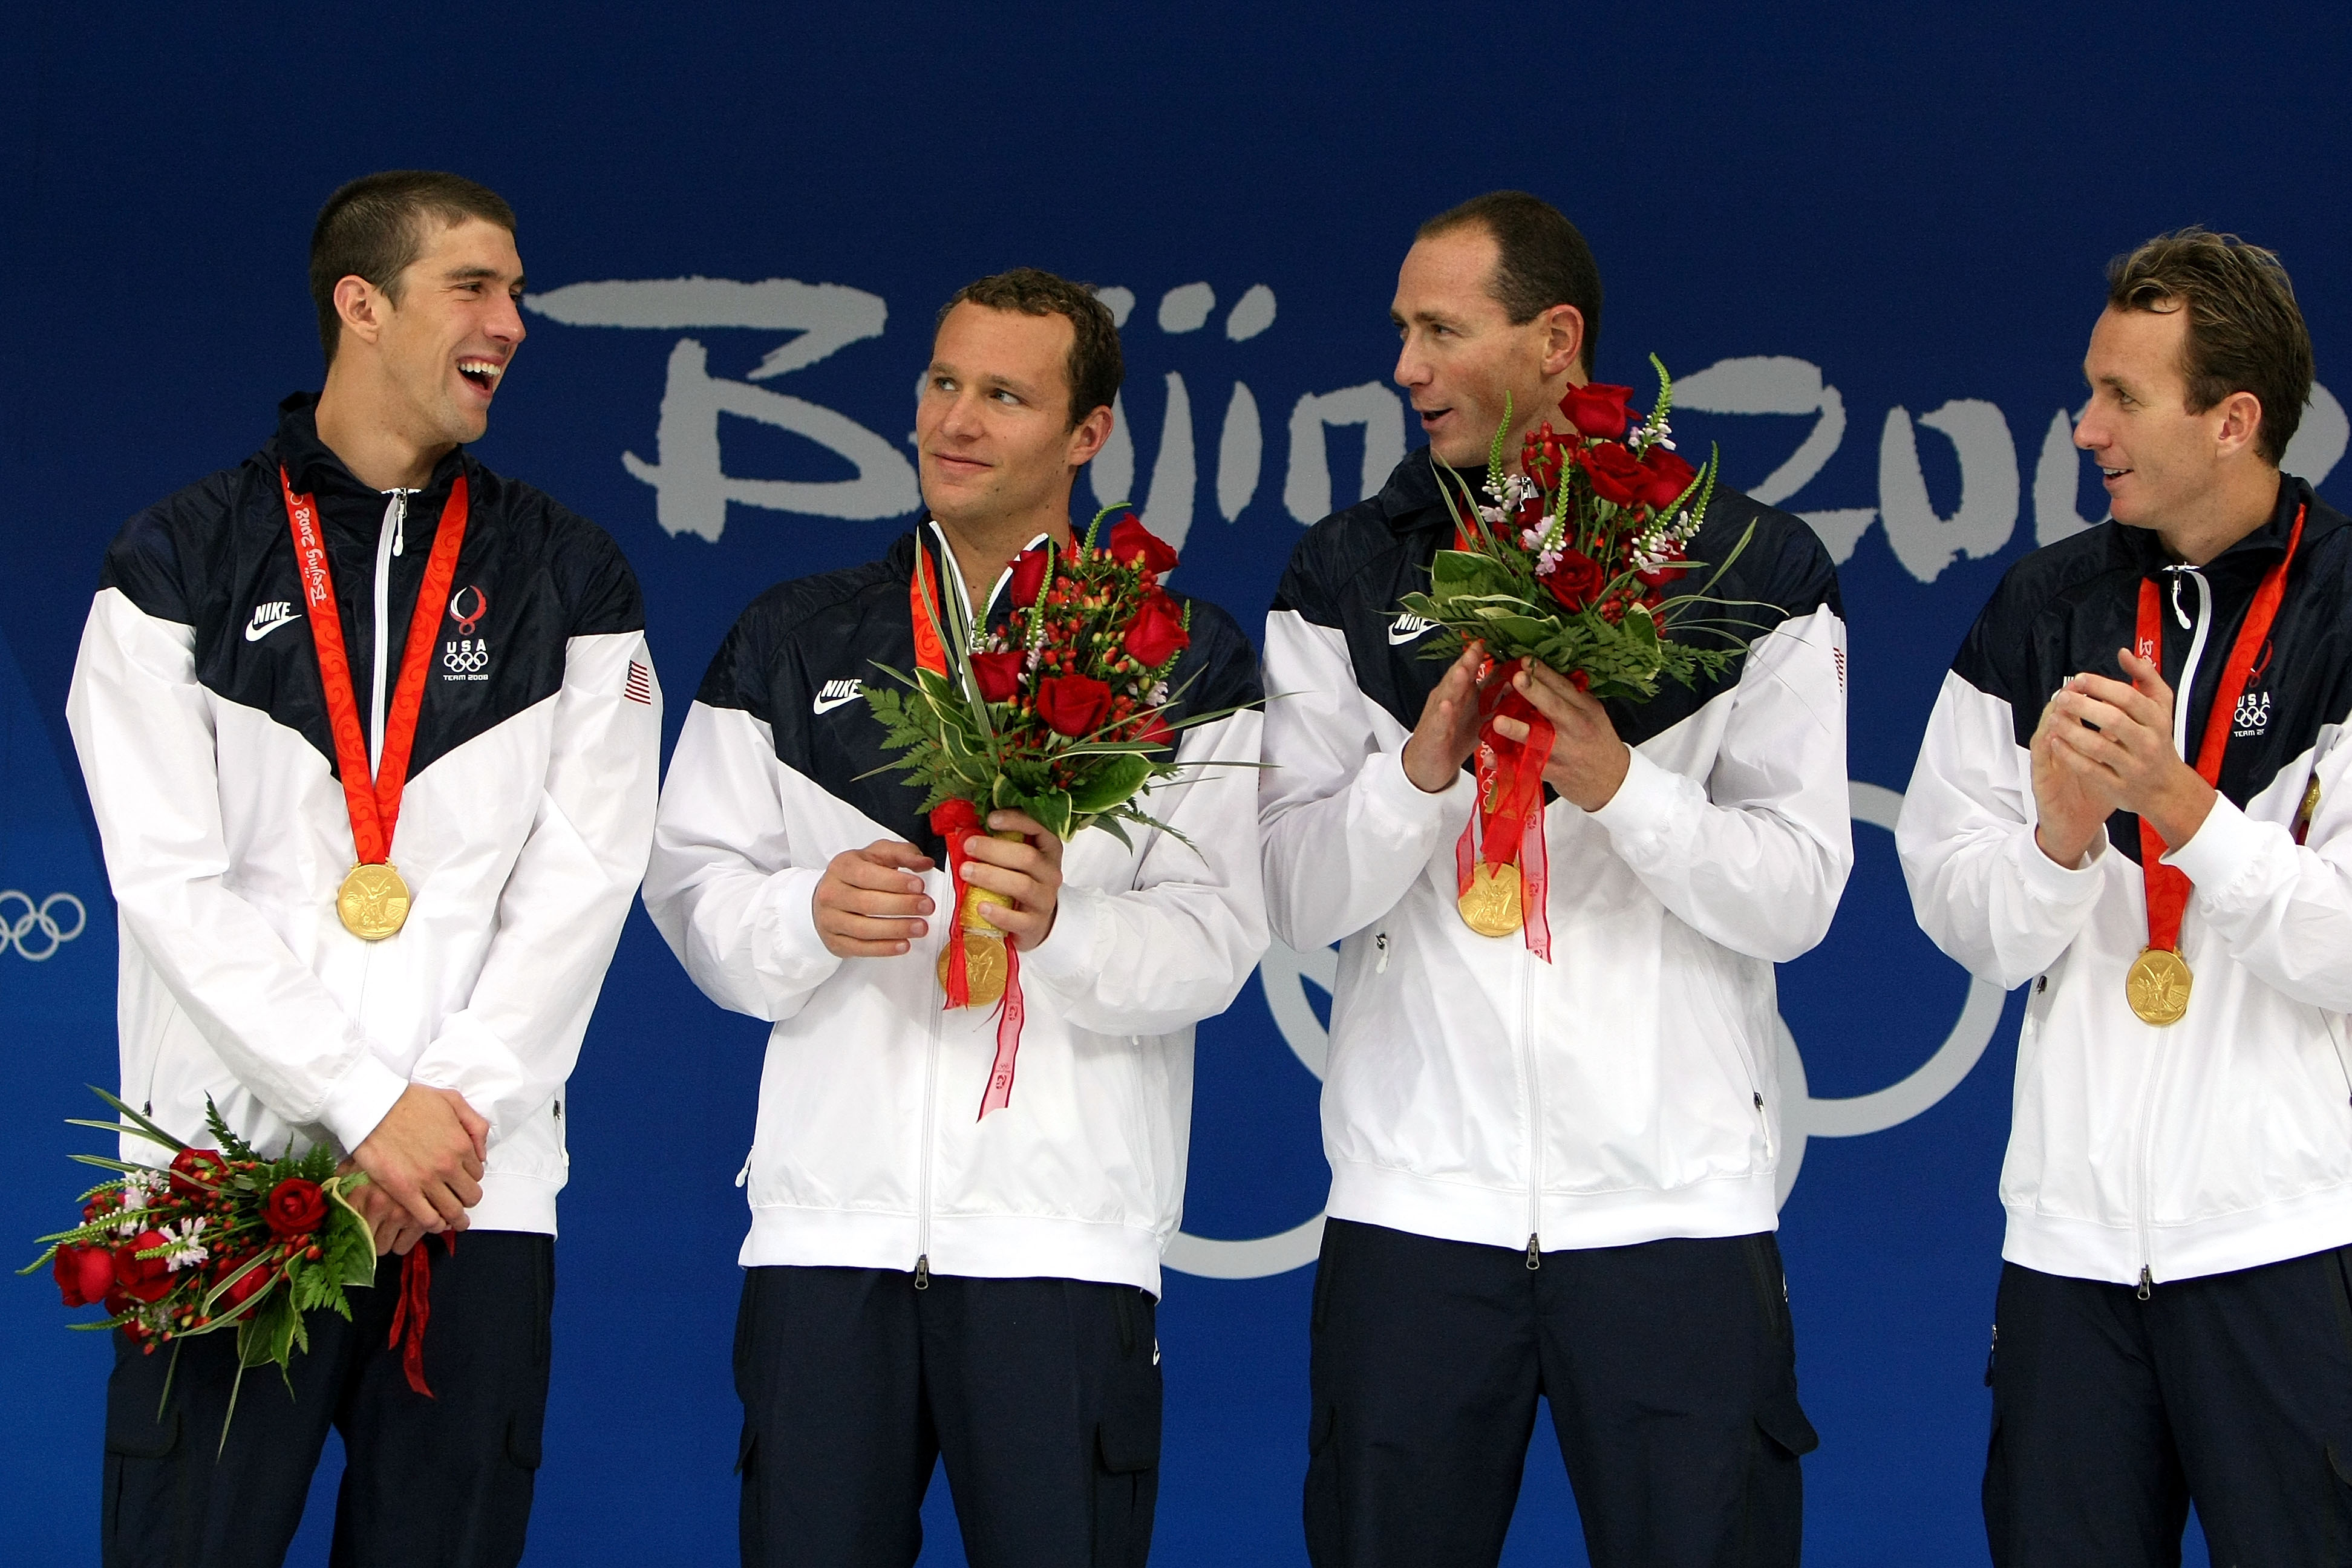 BEIJING - AUGUST 17:  (L-R) Michael Phelps, Brendan Hansen, Jason Lezak and Aaron Piersol of the United States stand on the podium after receiving their gold medals in the Men's 4x100 Medley Relay at the National Aquatics Centre during Day 9 of the Beijin